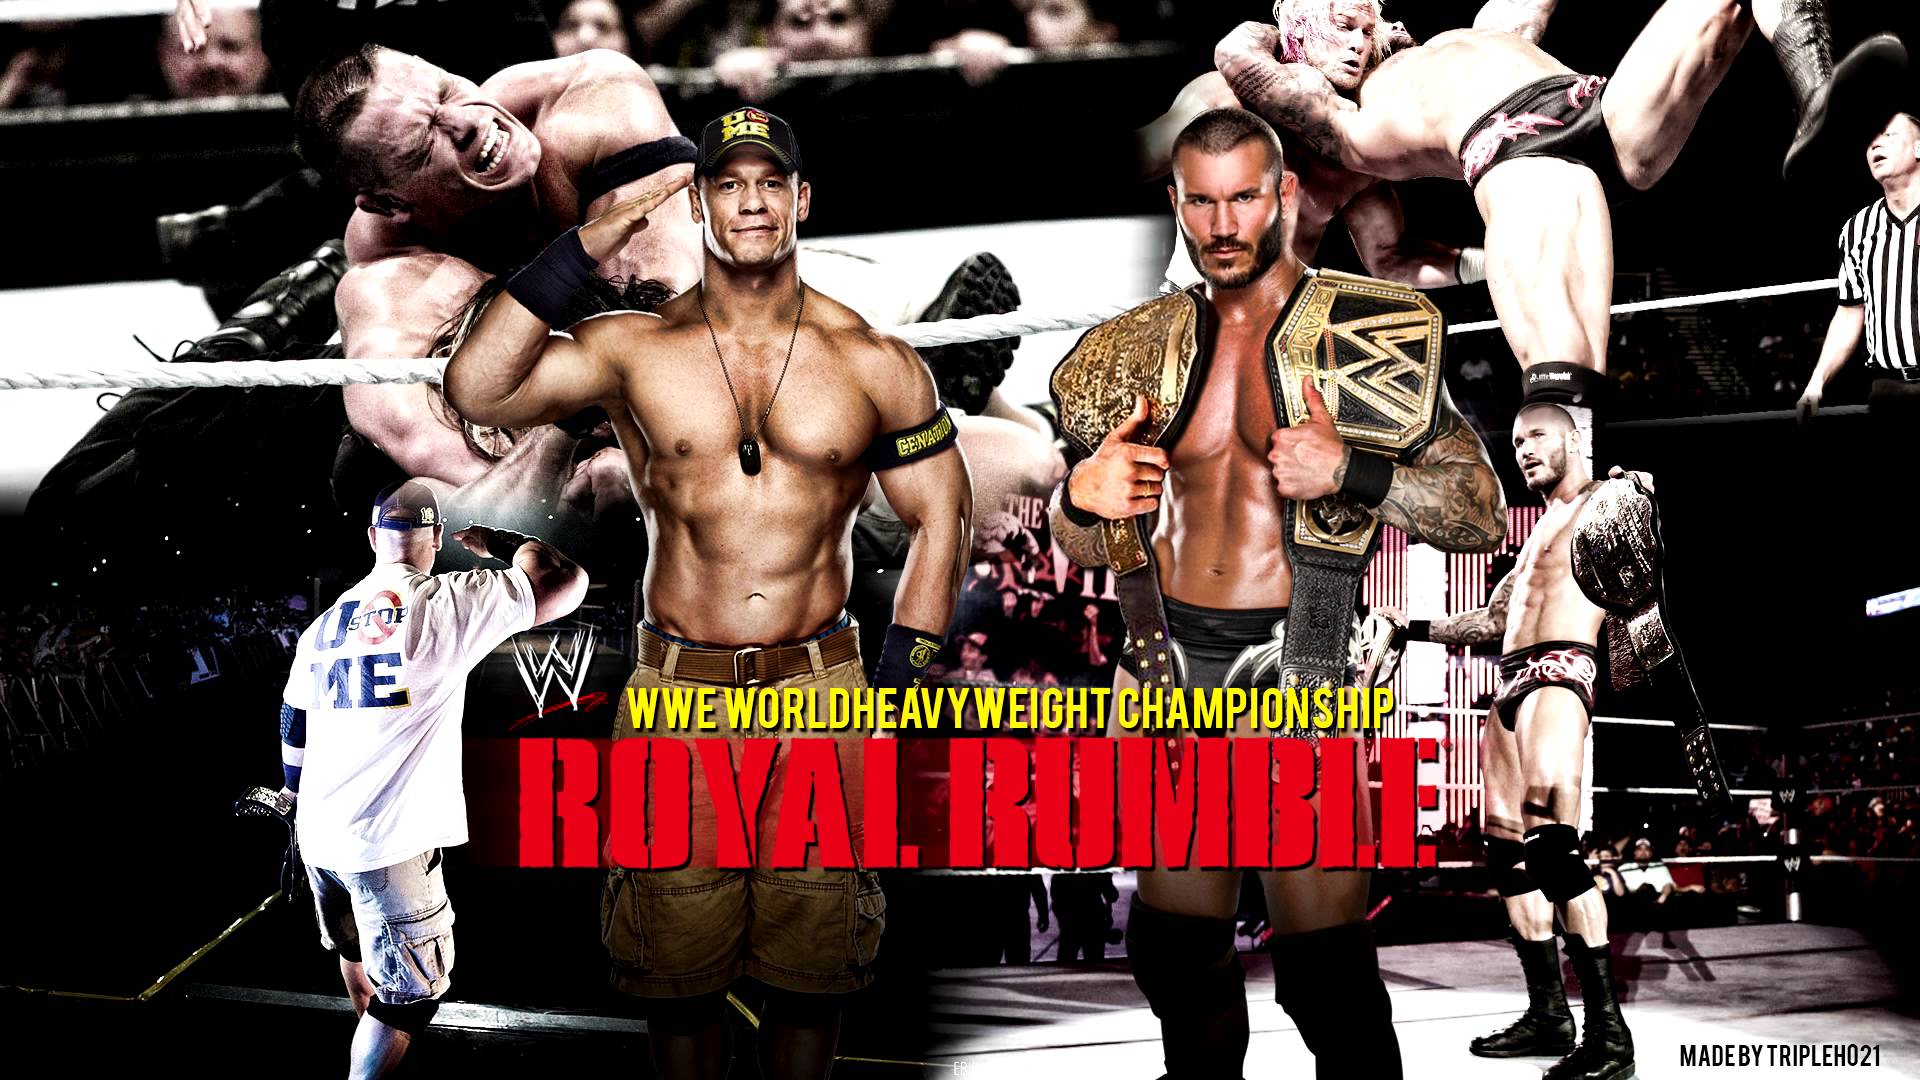 Wwe Royal Rumble Official Themesong We Own It HD